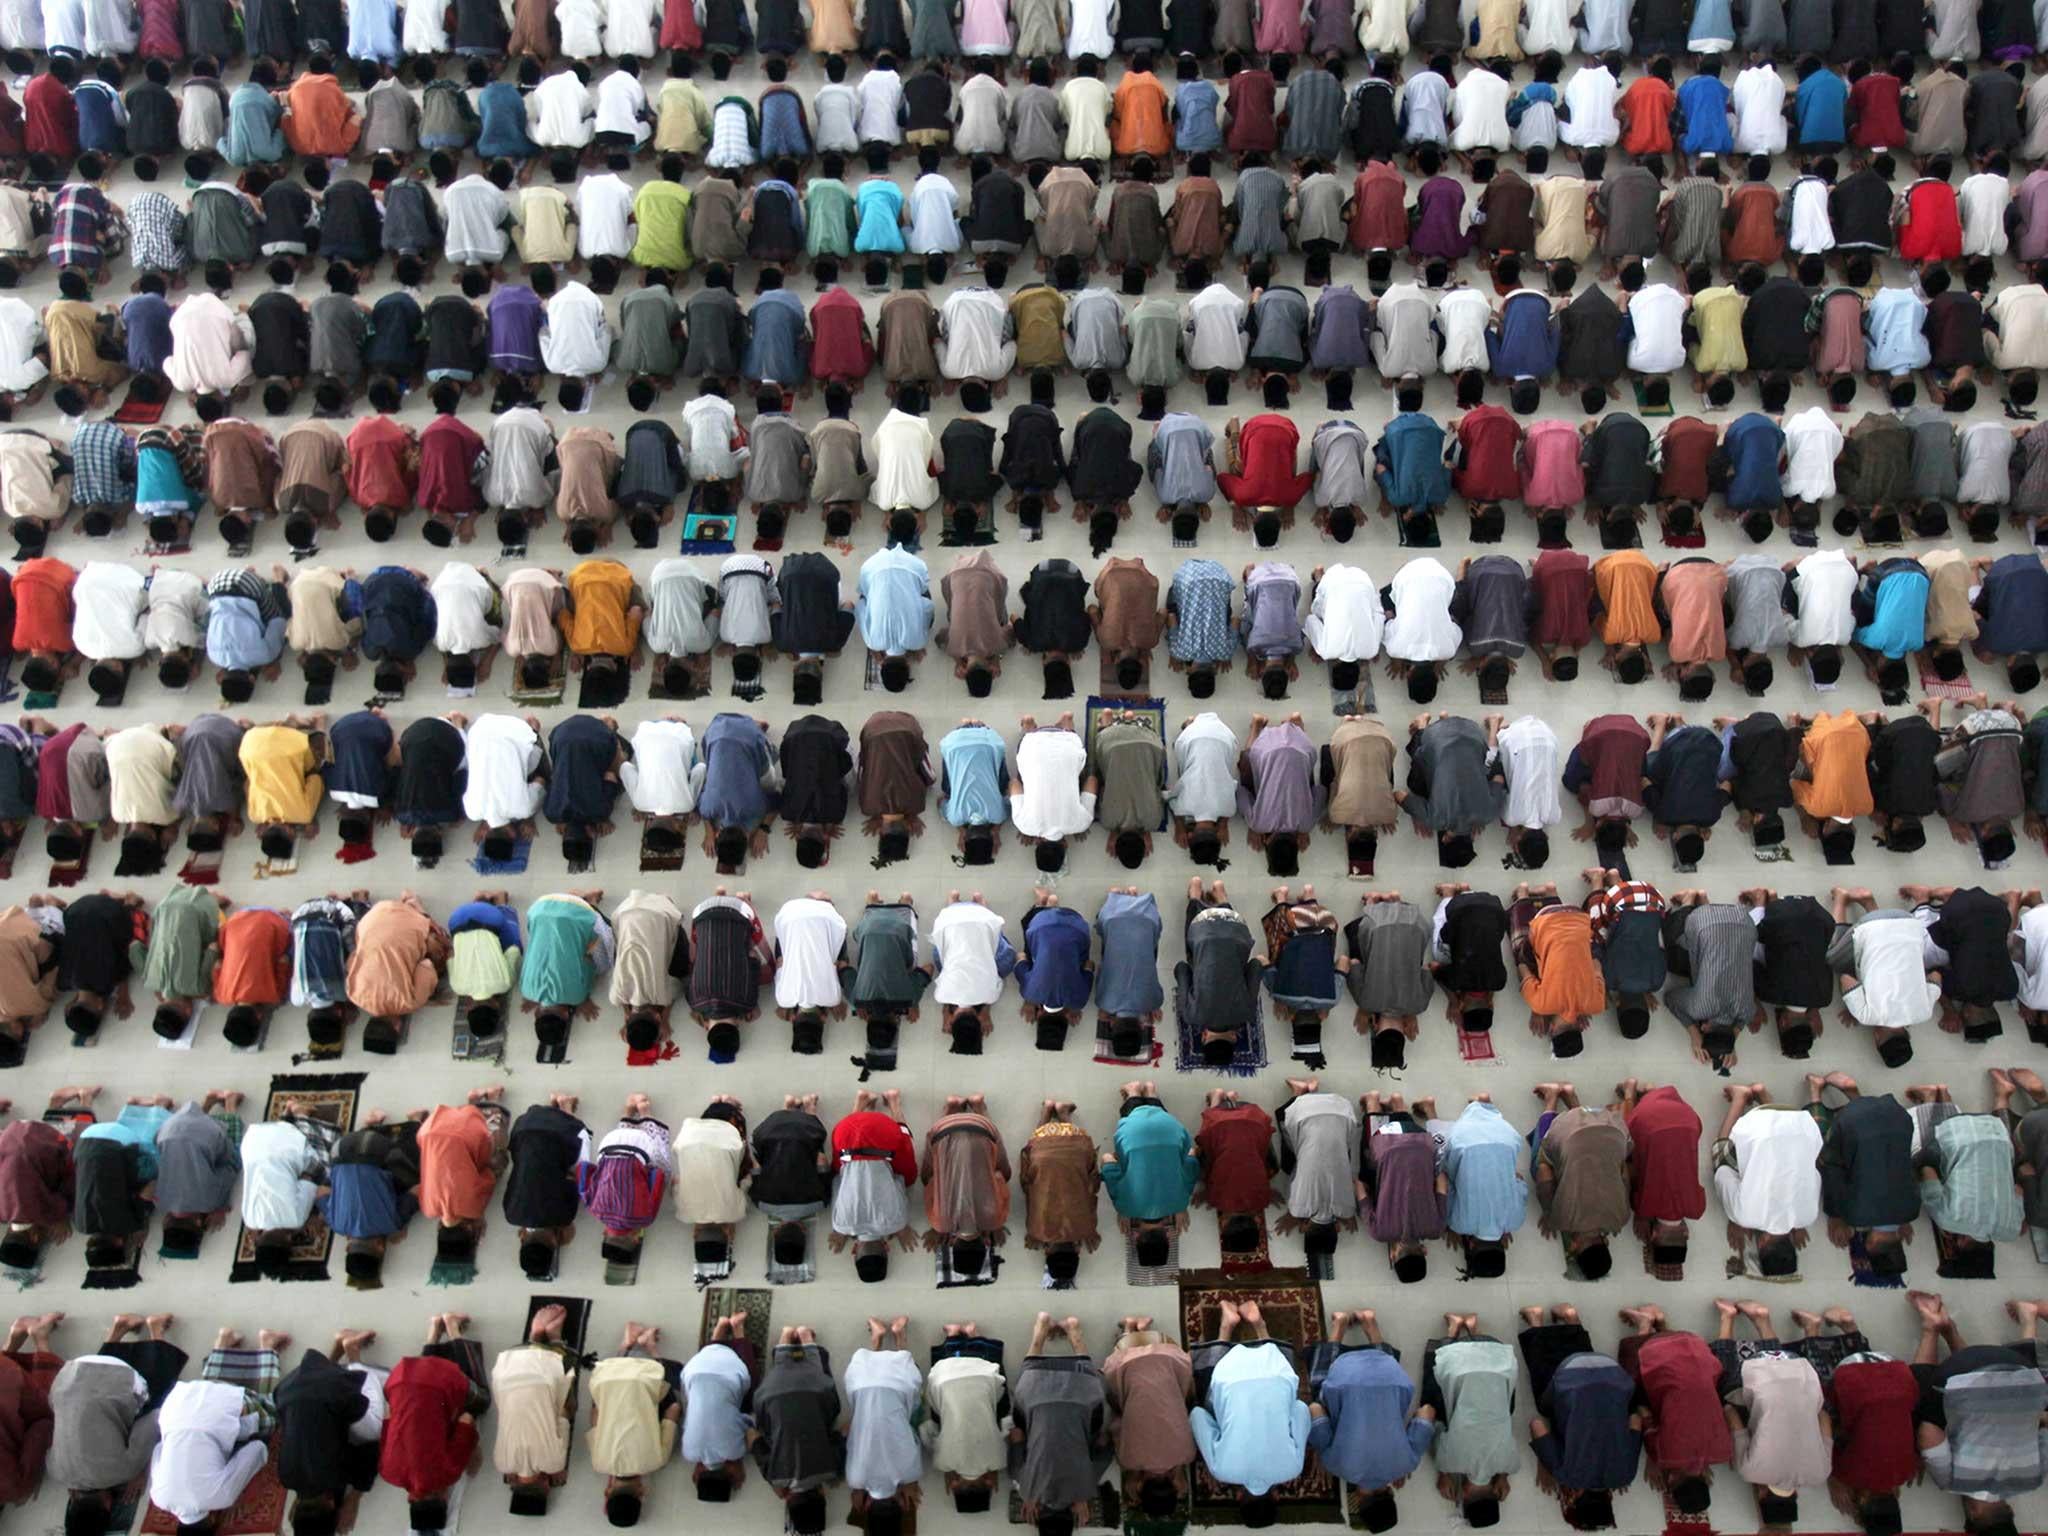 Students perform a prayer on the first day of the holy fasting month of Ramadan at Ar-Raudlatul Hasanah Islamic boarding school in Medan, North Sumatra, Indonesia. During Ramadan, the holiest month in Islamic calendar, Muslims refrain from eating, drinking, smoking and sex from dawn to dusk